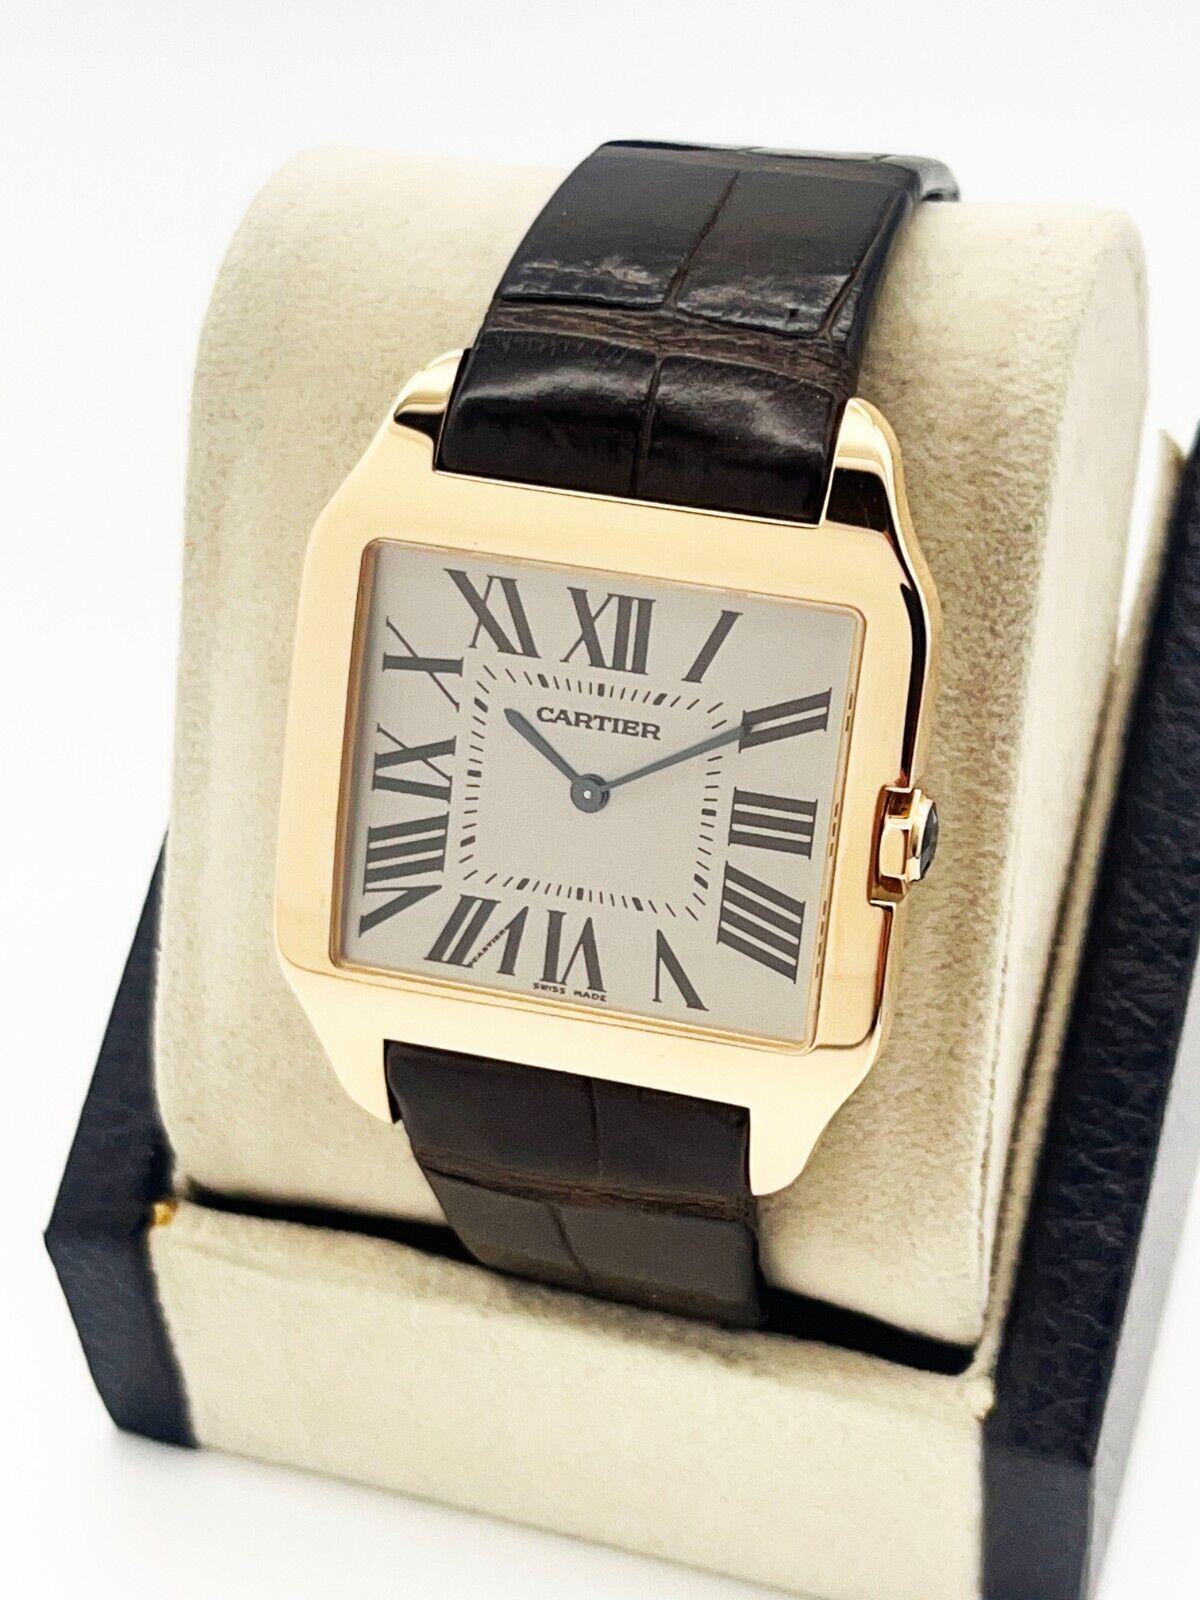 Style Number: 2650
 
Model: Santos Dumont
 
Case Material: 18K Rose Gold
 
Band: Brown Leather
 
Bezel: 18K Rose Gold
 
Face: Sapphire Crystal 
 
Case Size: 44.6mm x 34.6mm
 
Includes: 
-Elegant Watch Box
-Certified Appraisal 
-1 Year Warranty